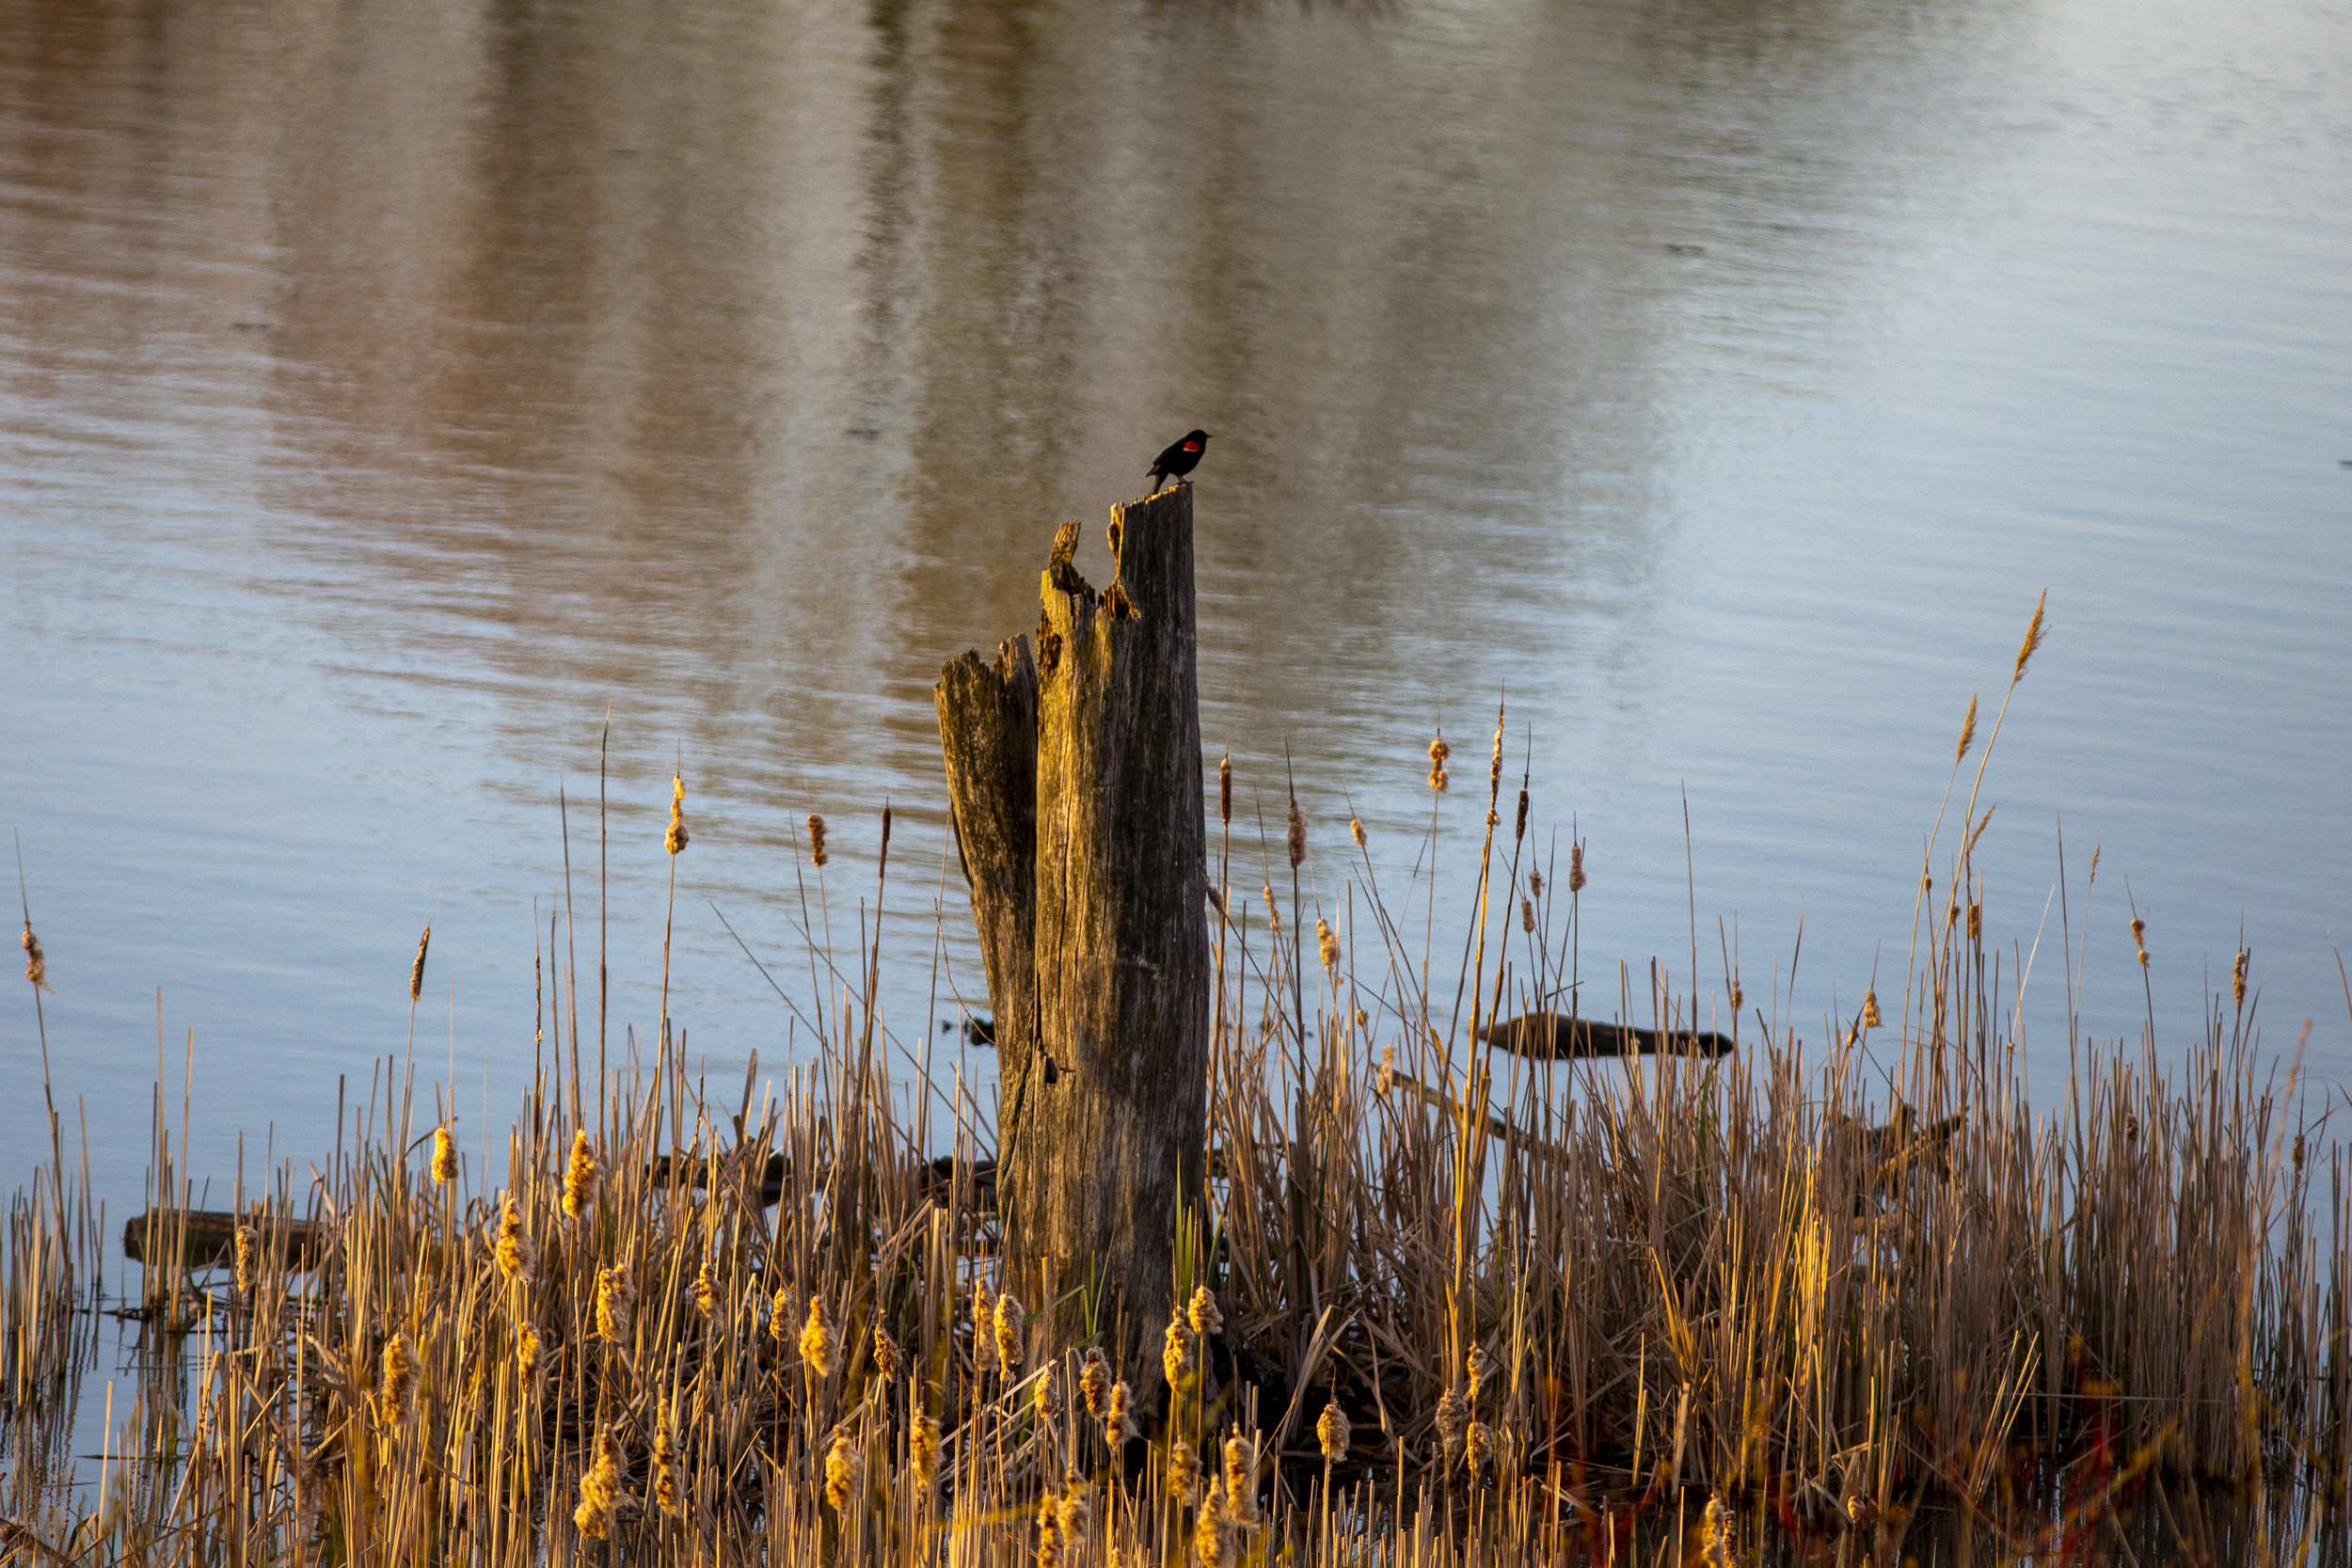 A black bird with a red patch on its shoulder stands in profile on an upright log at the edge of a pond.